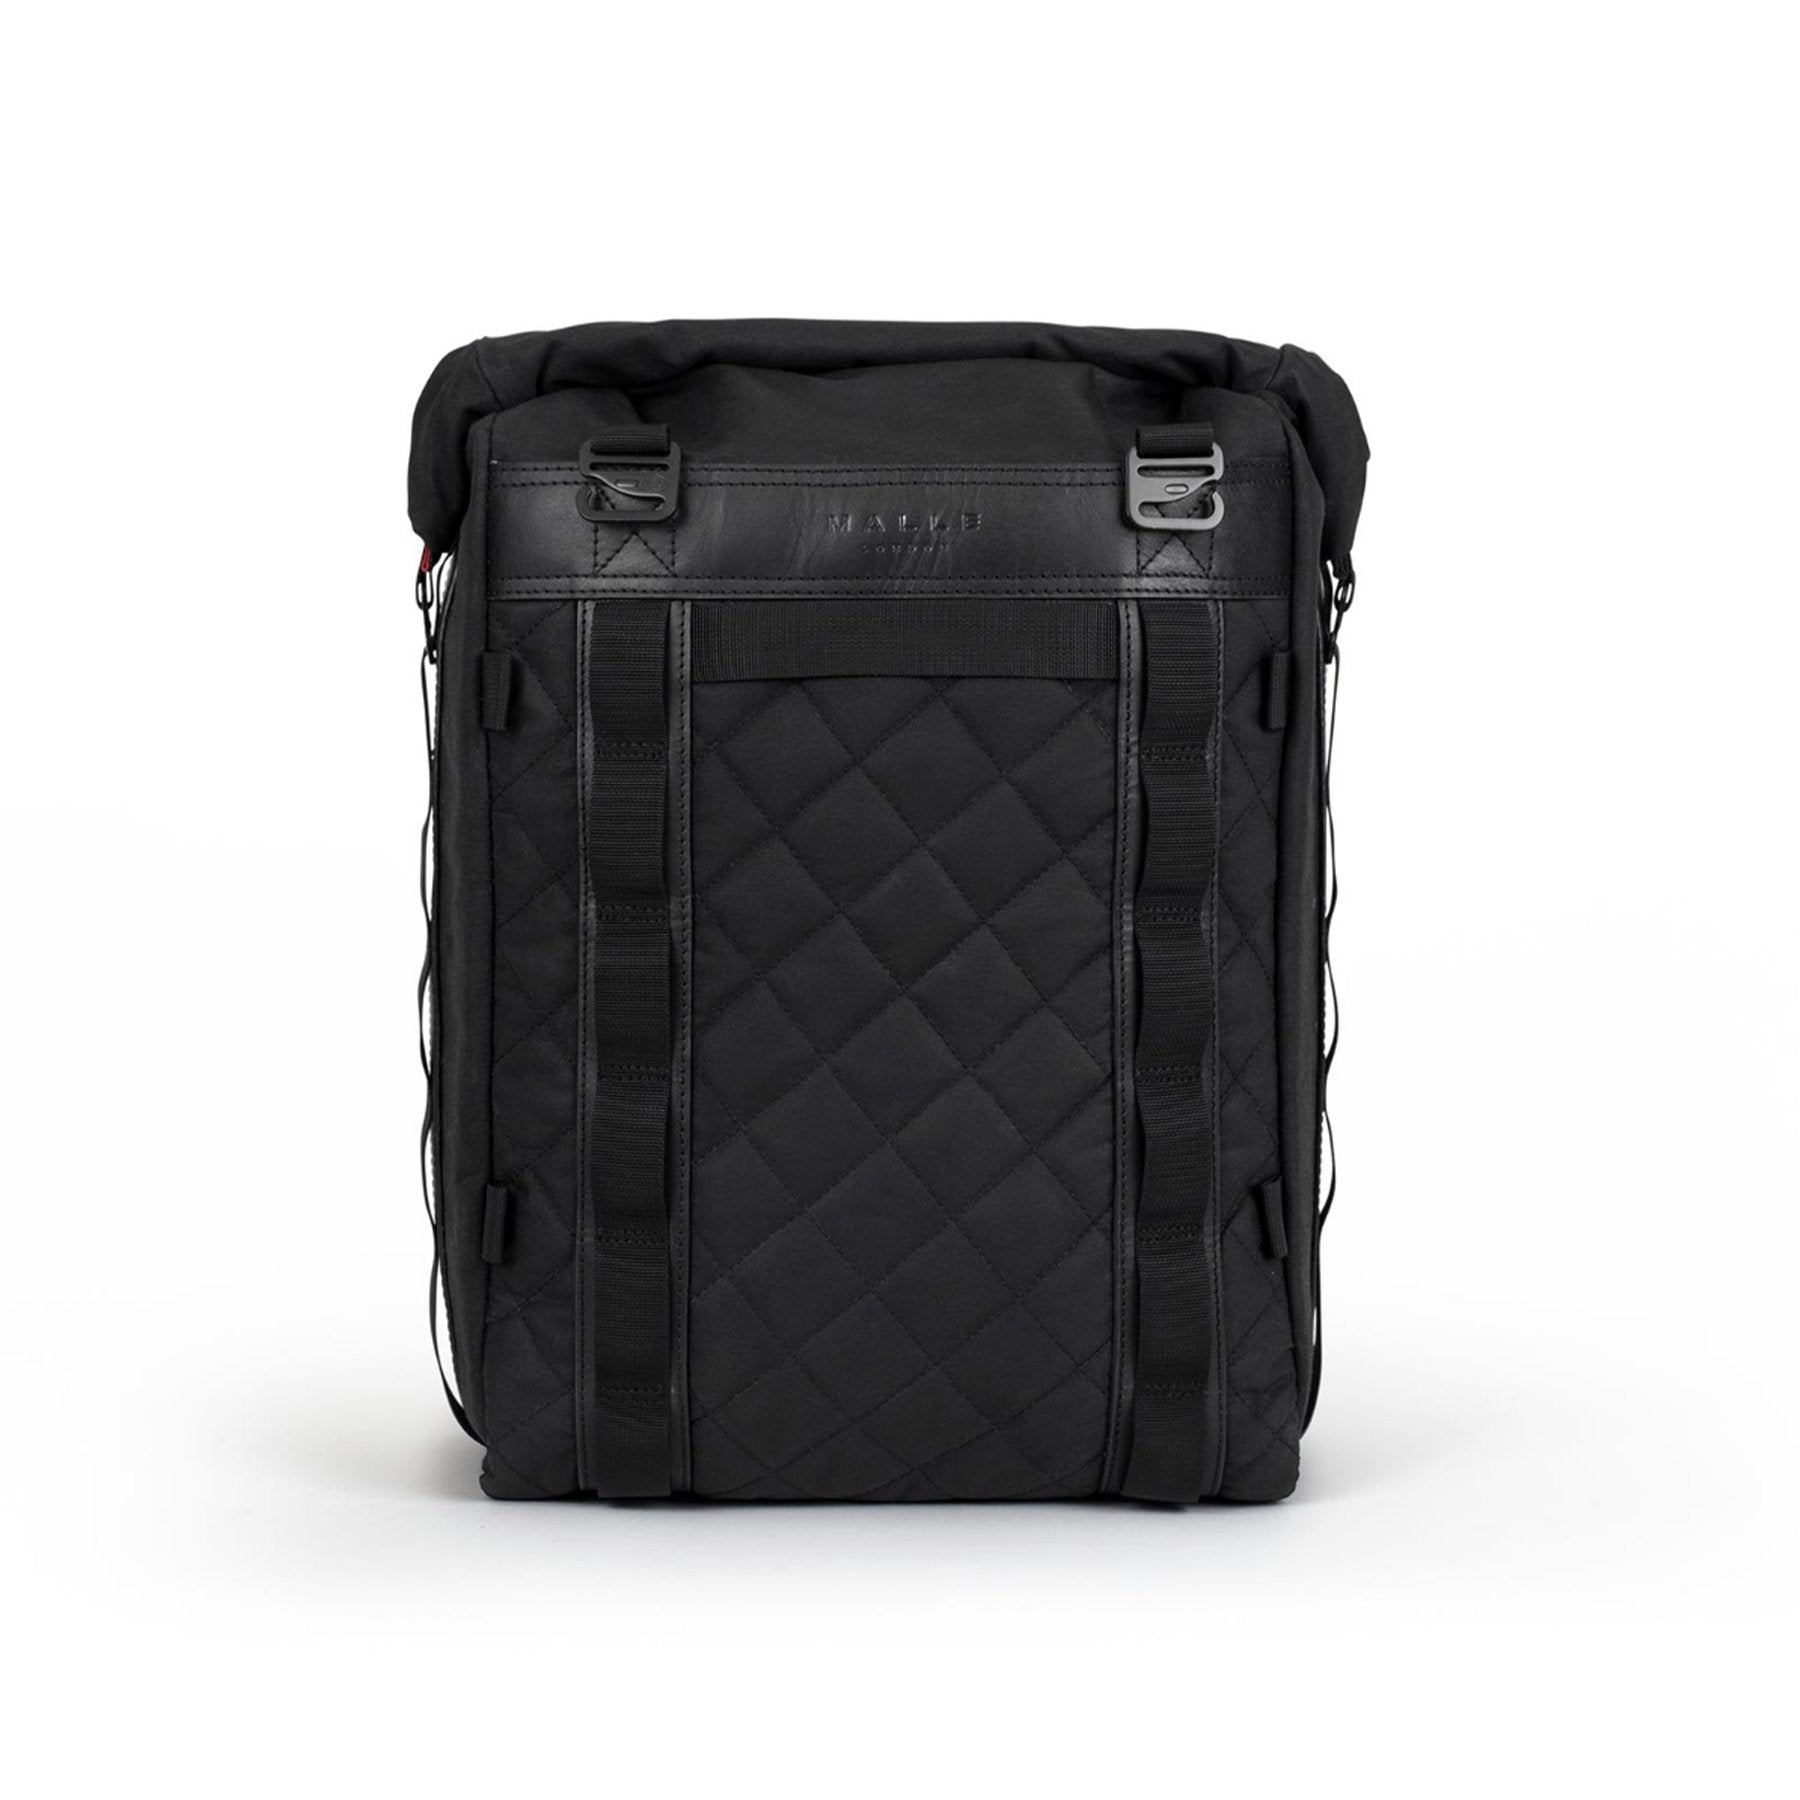 High quality motorcycle bags and clothing from Malle London – Bad and Bold  - Biker's finest